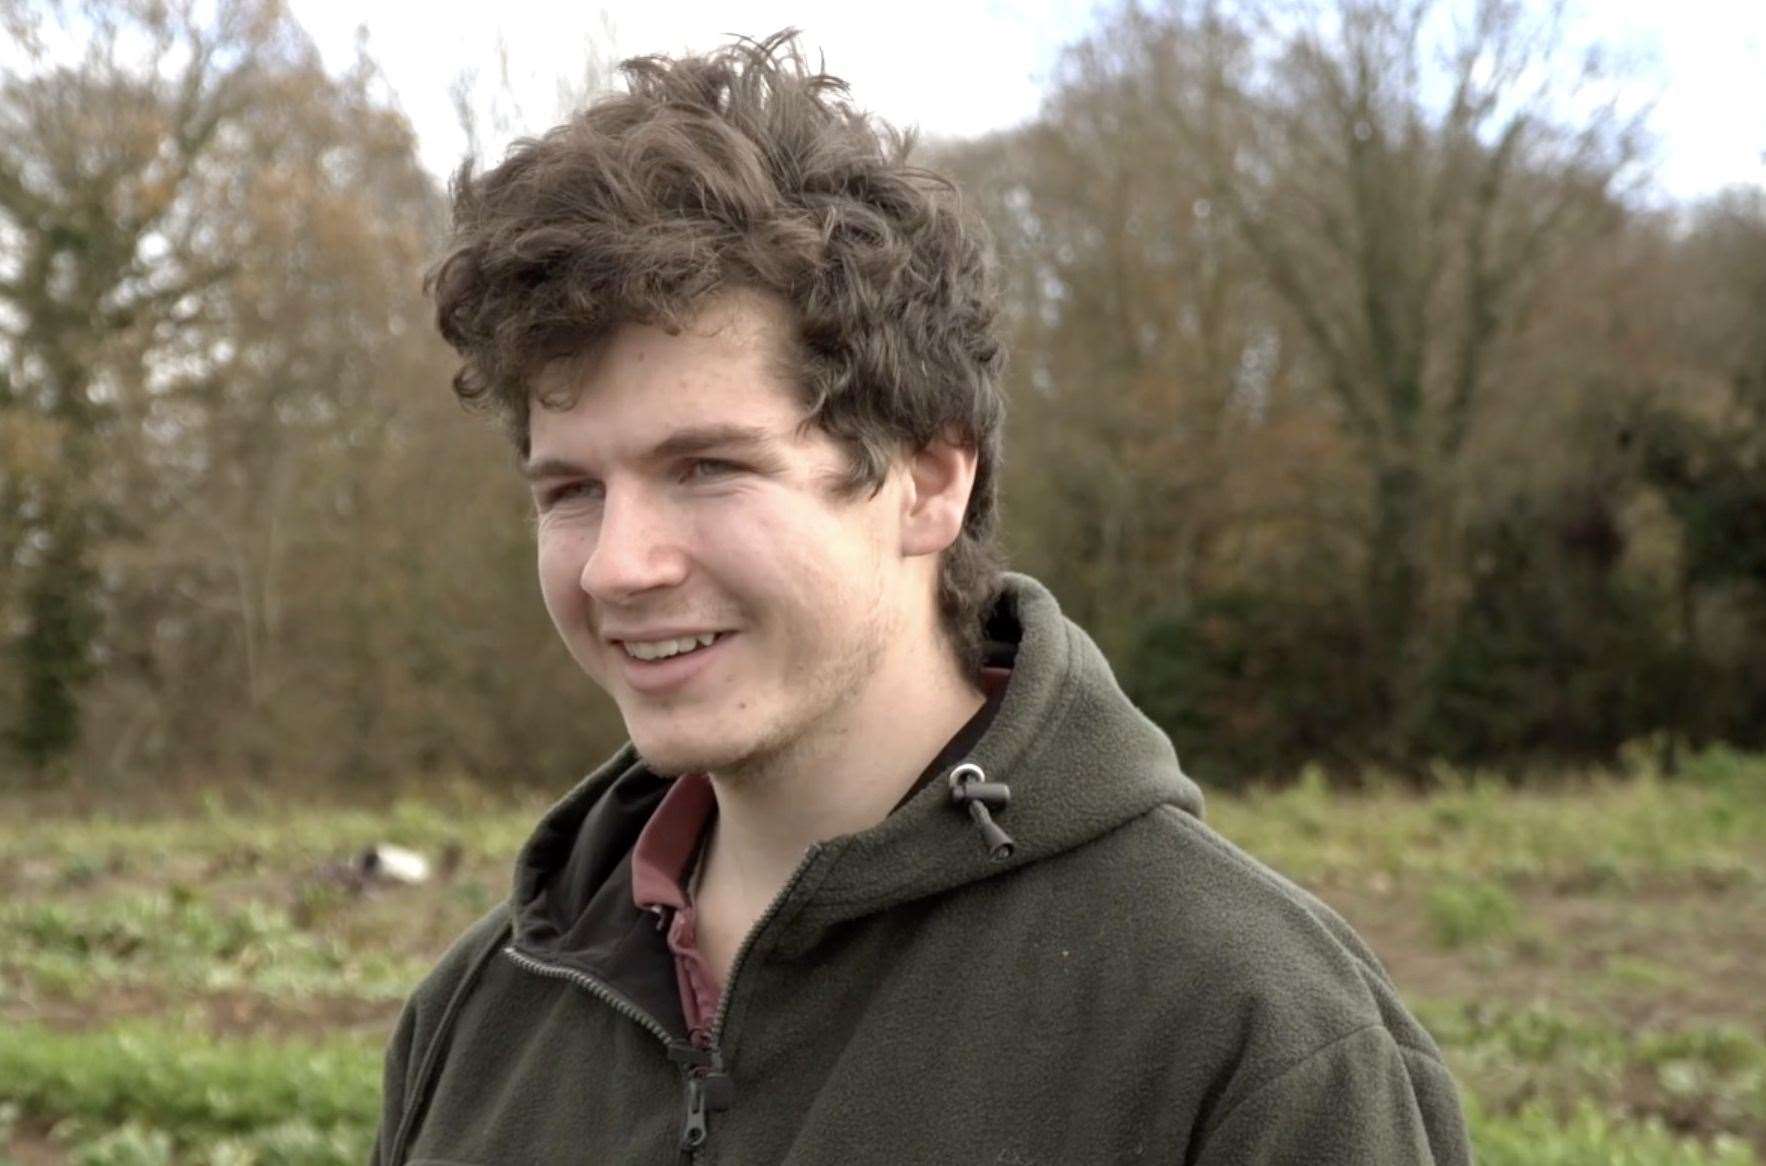 Jack Scott, 20, is thought to be one of the county's youngest farmers